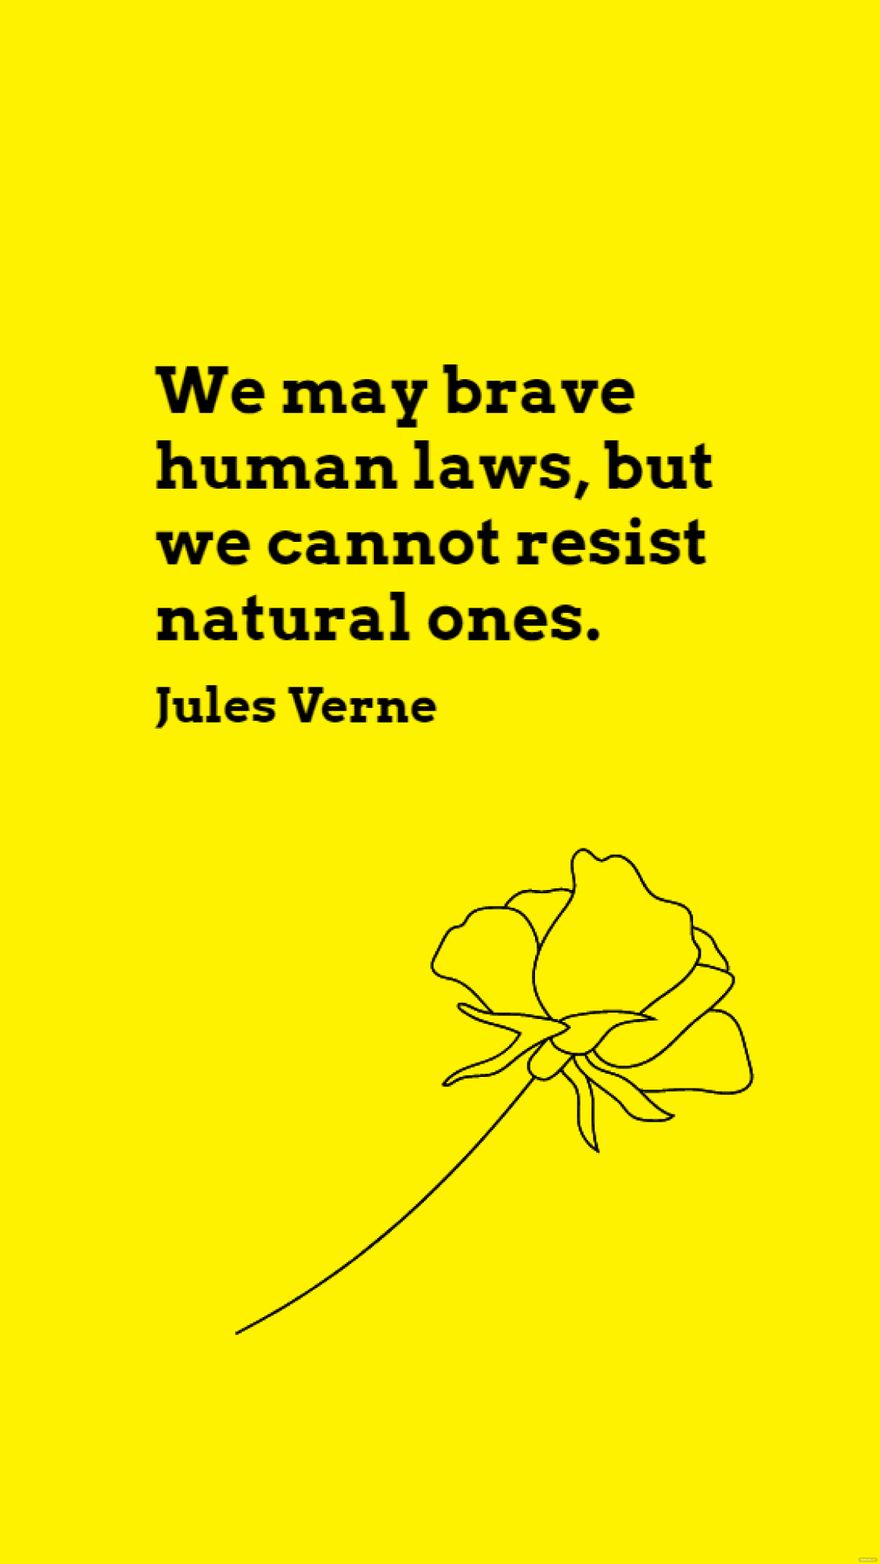 Jules Verne - We may brave human laws, but we cannot resist natural ones.